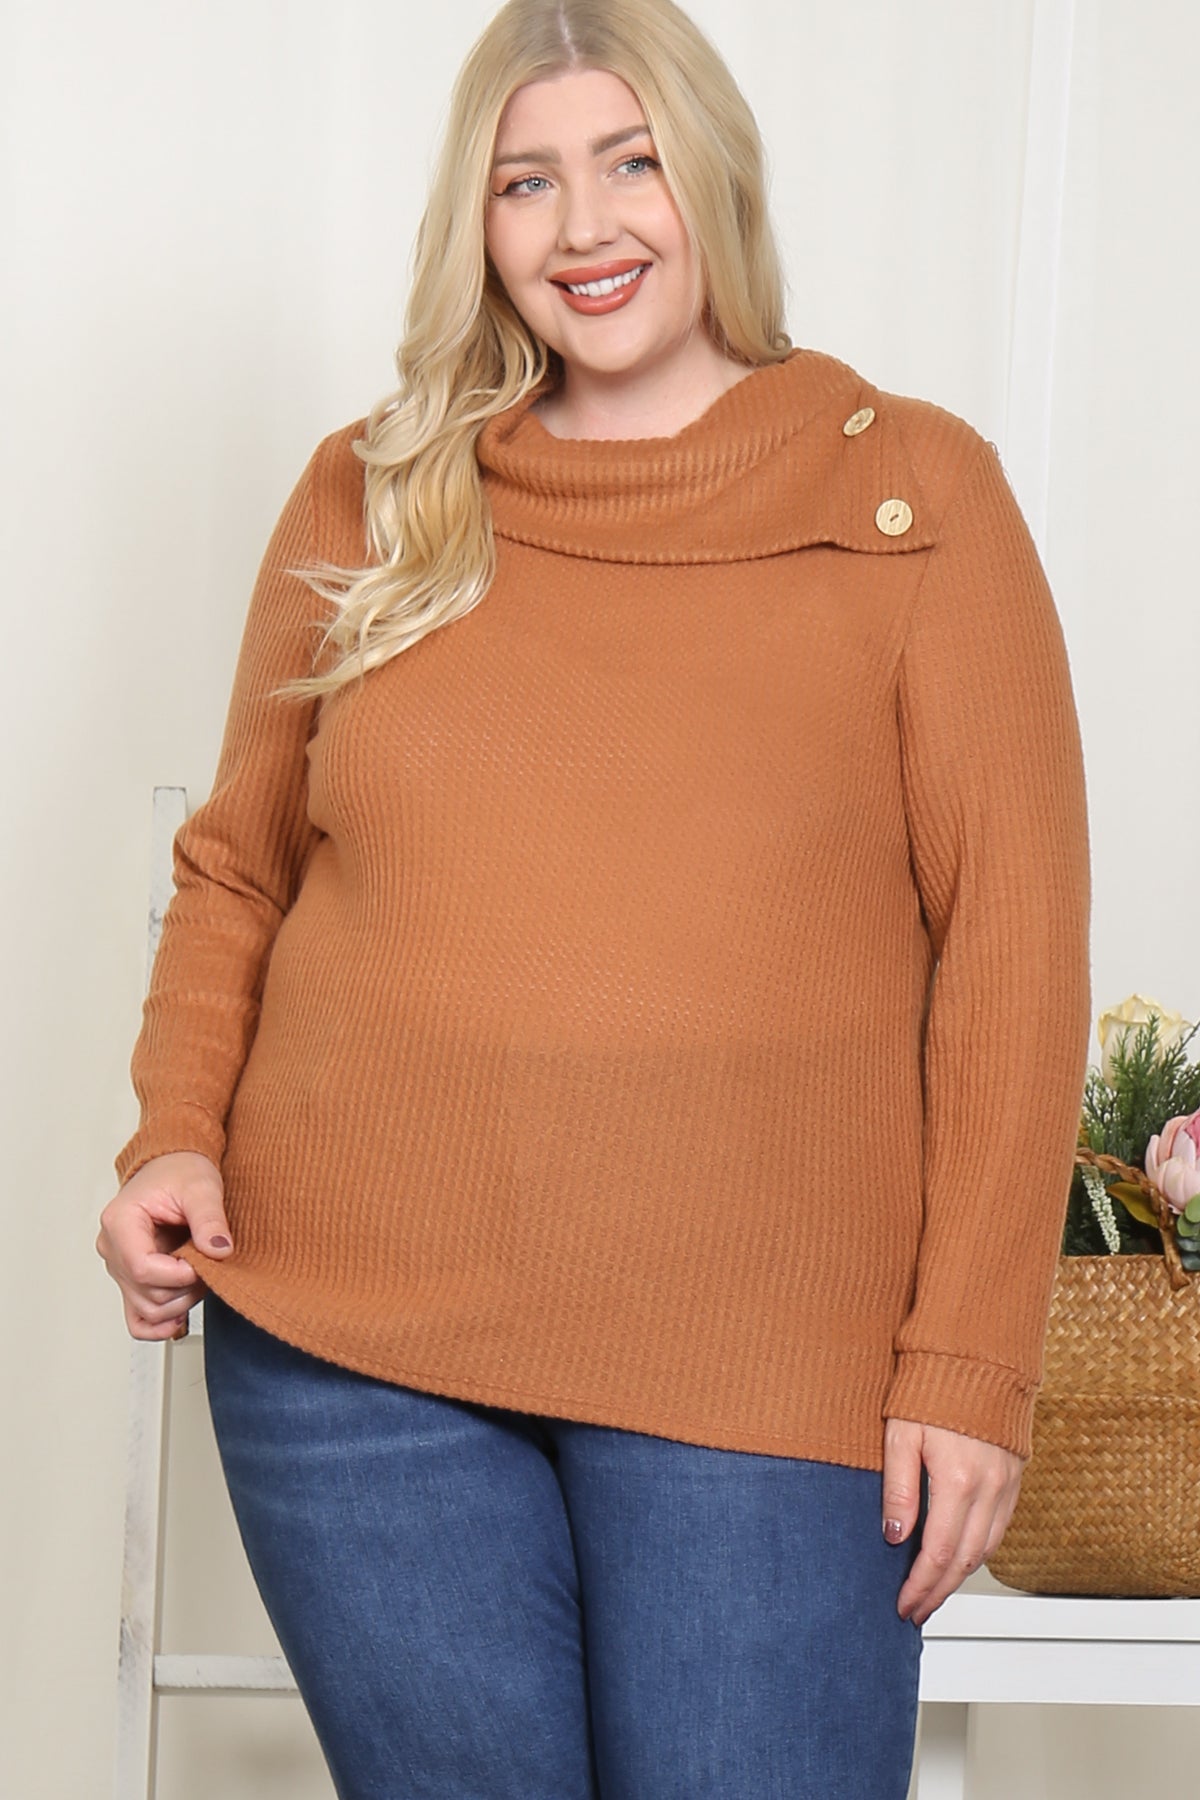 PLUS SIZE BUTTON DETAIL RIB TOP 2-2-2 (NOW $7.75 ONLY!)